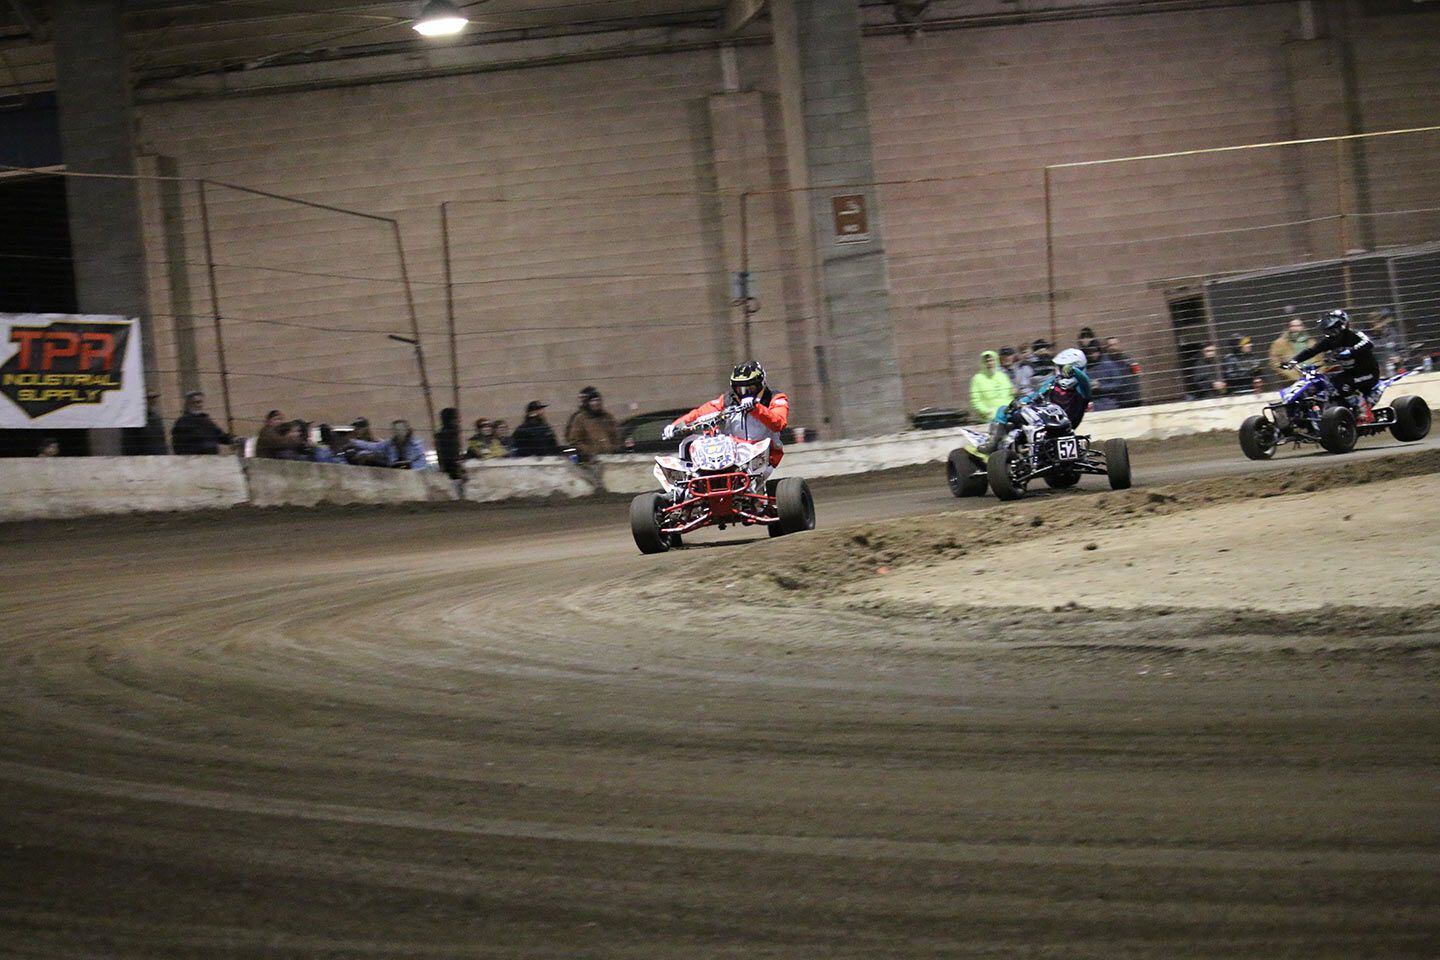 Quads were comin’ in hot at the Cherry City Classic dirt track races.